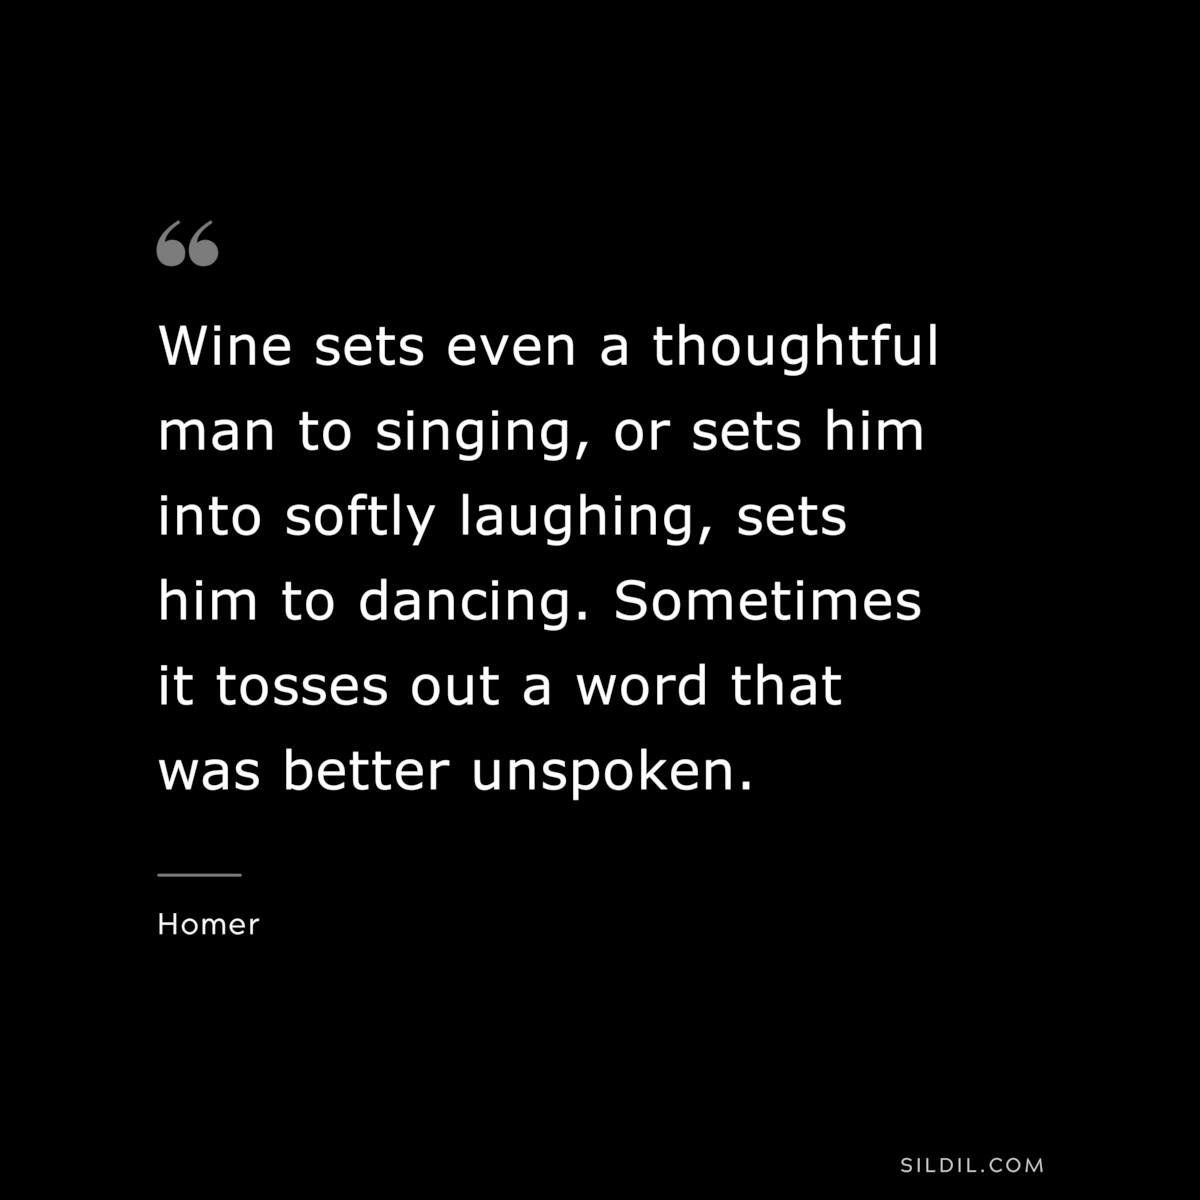 Wine sets even a thoughtful man to singing, or sets him into softly laughing, sets him to dancing. Sometimes it tosses out a word that was better unspoken. ― Homer